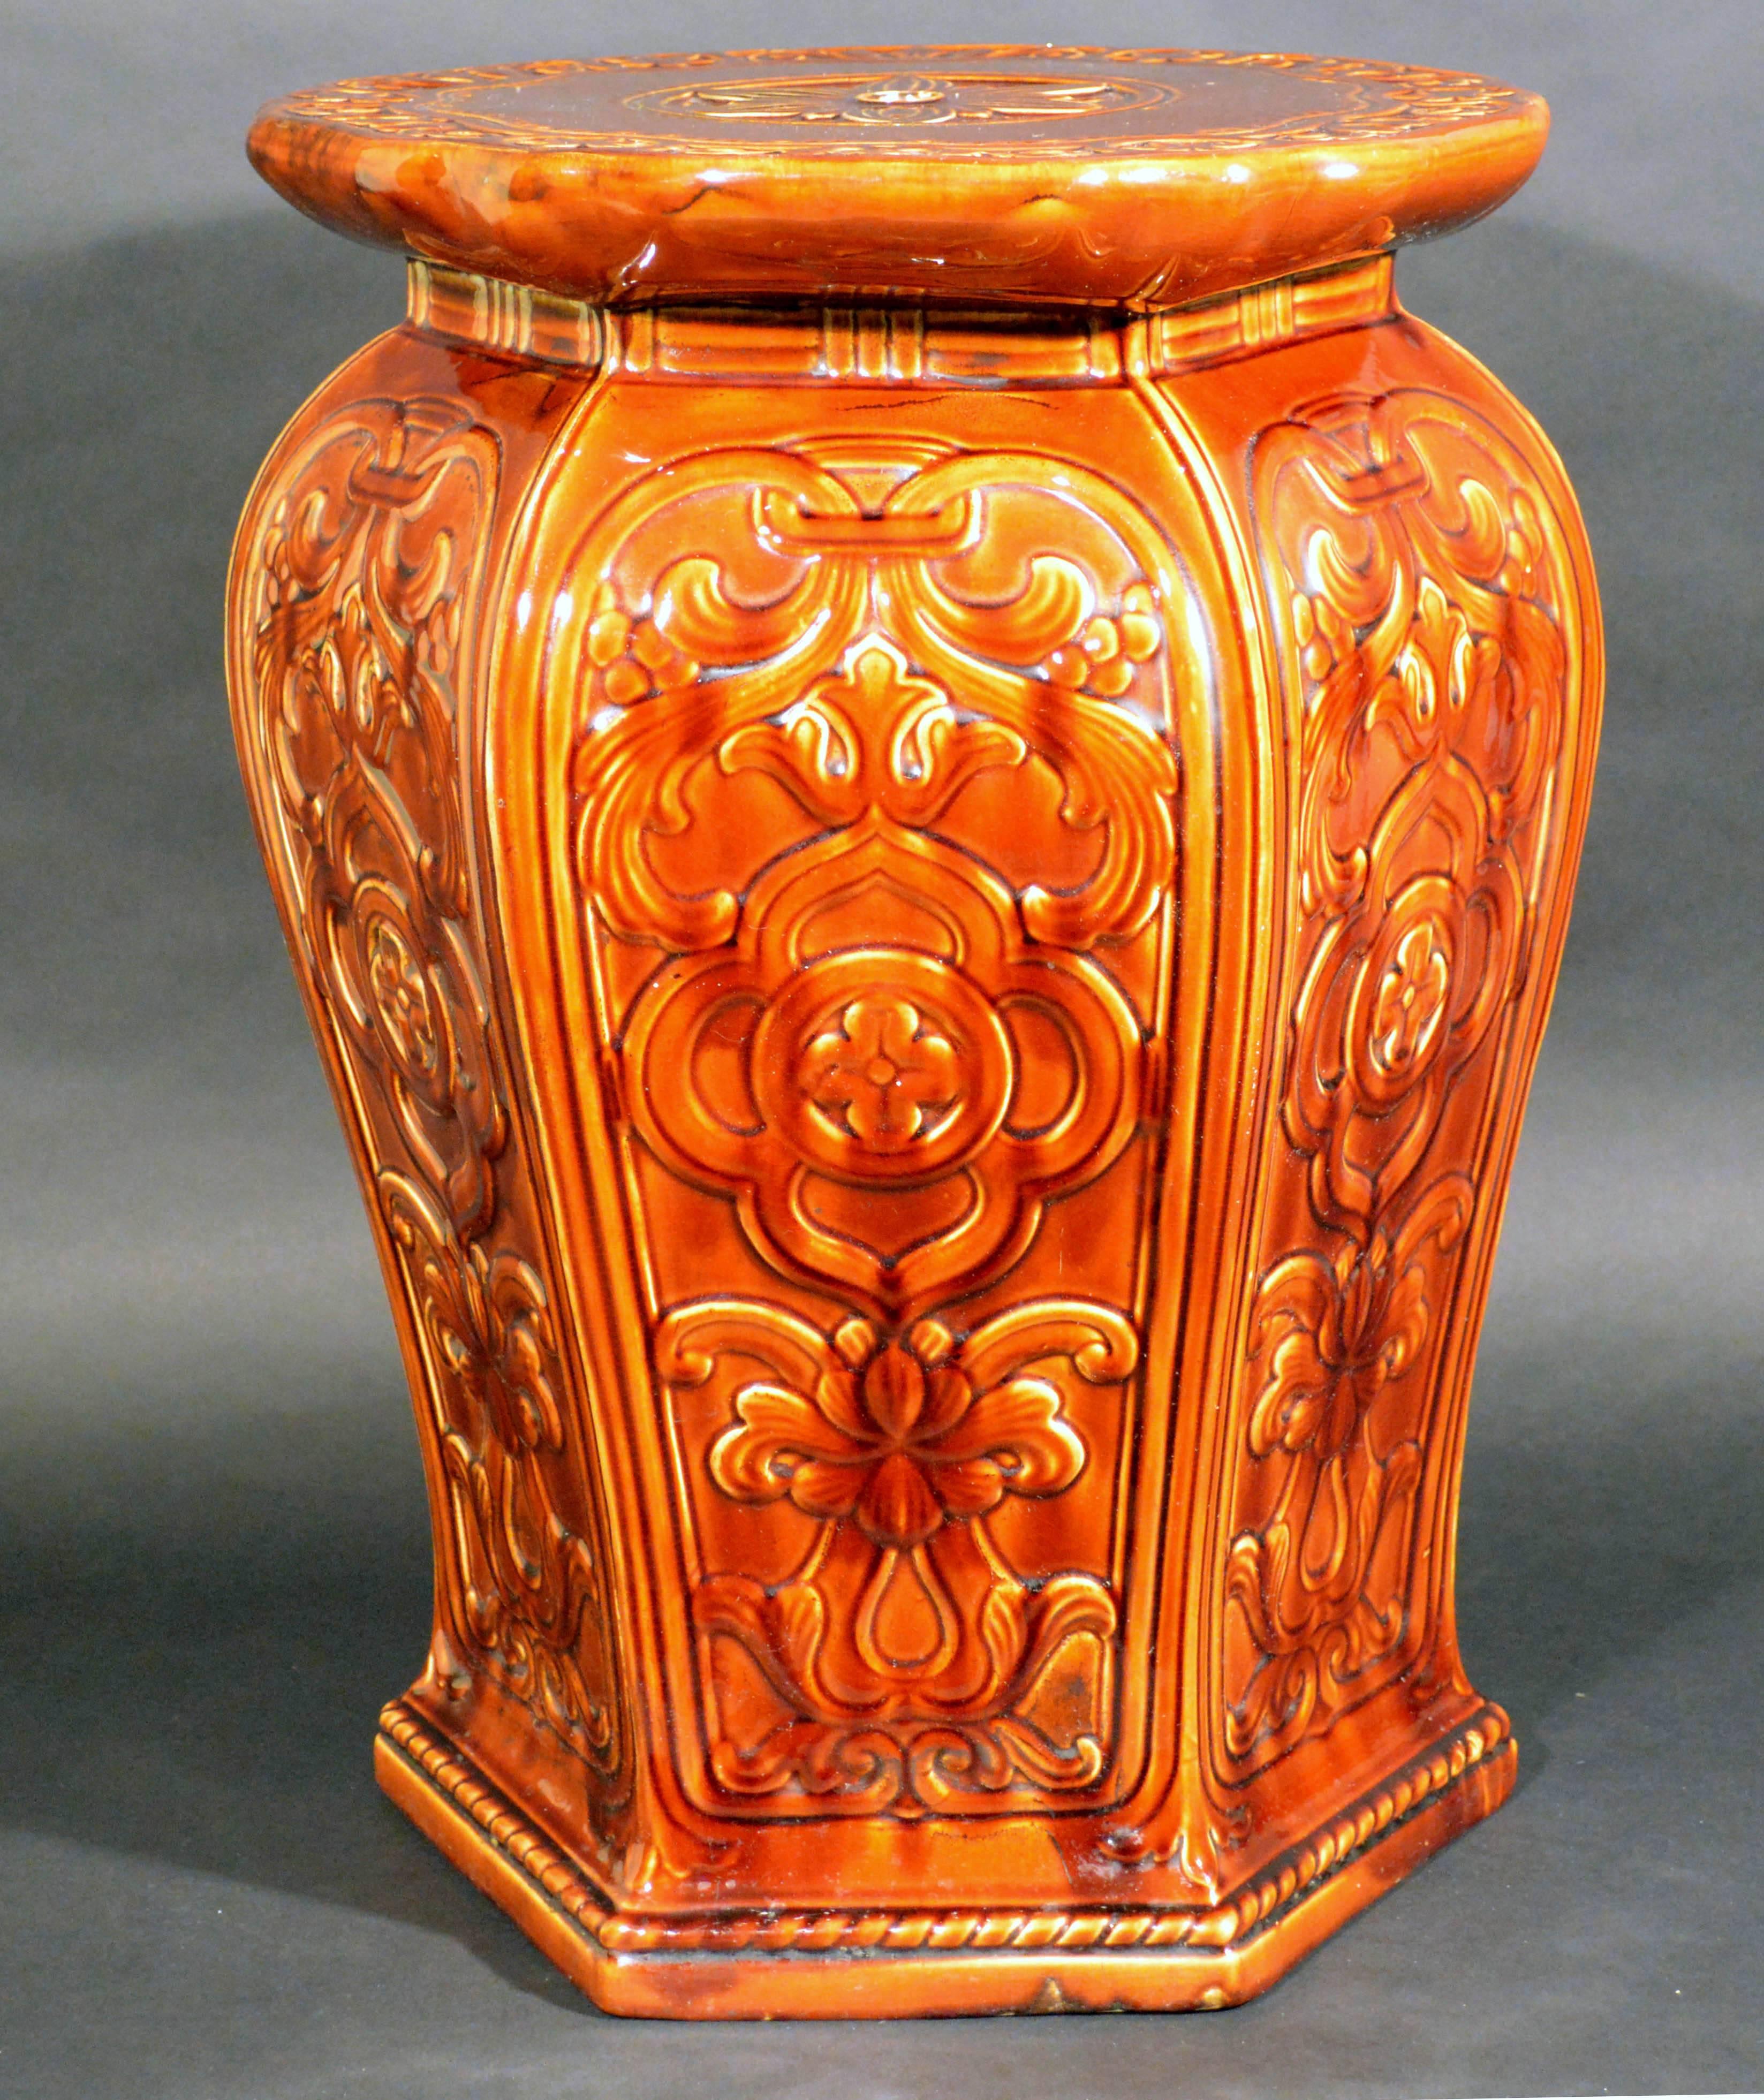 The Augustus Welby Pugin Minton majolica garden seat from the Arts & Craft period is a golden brown.  

The seat  with a central flowerhead on the circular top over a hexagonal, baluster-form body is decorated with polychrome arabesques of